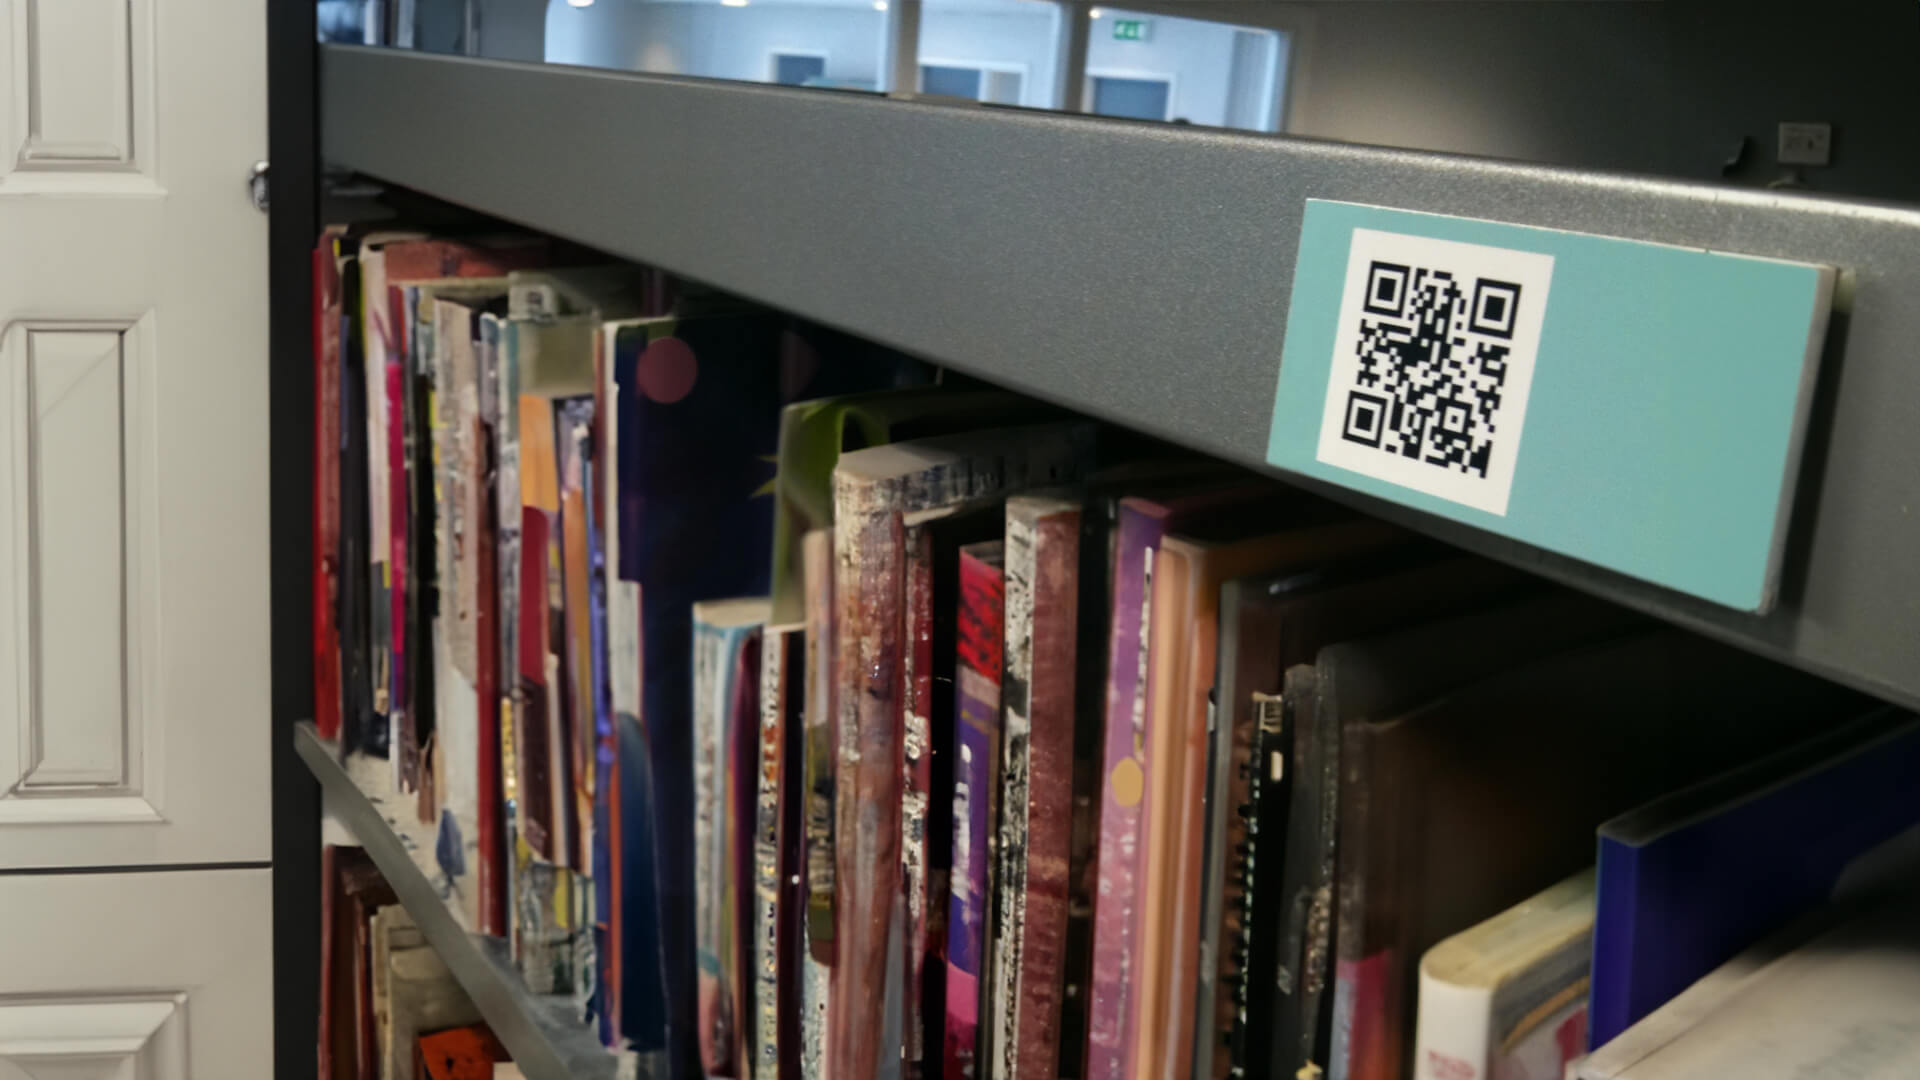  A bookstore using QR Code stickers for showing book section information.